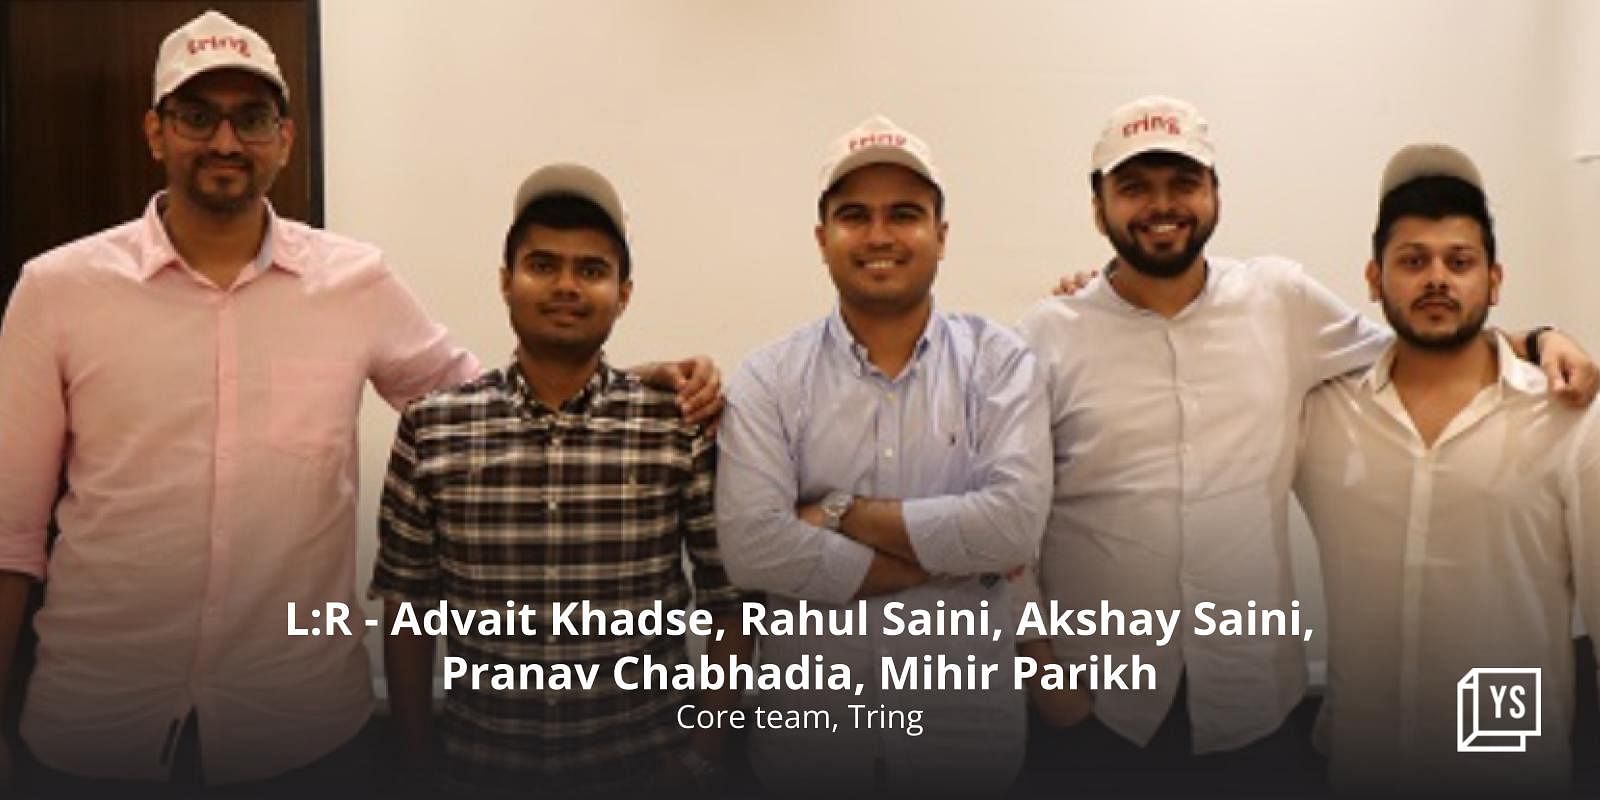 You are currently viewing Celebrity engagement platform Tring raises $5M led by Kalaari Capital